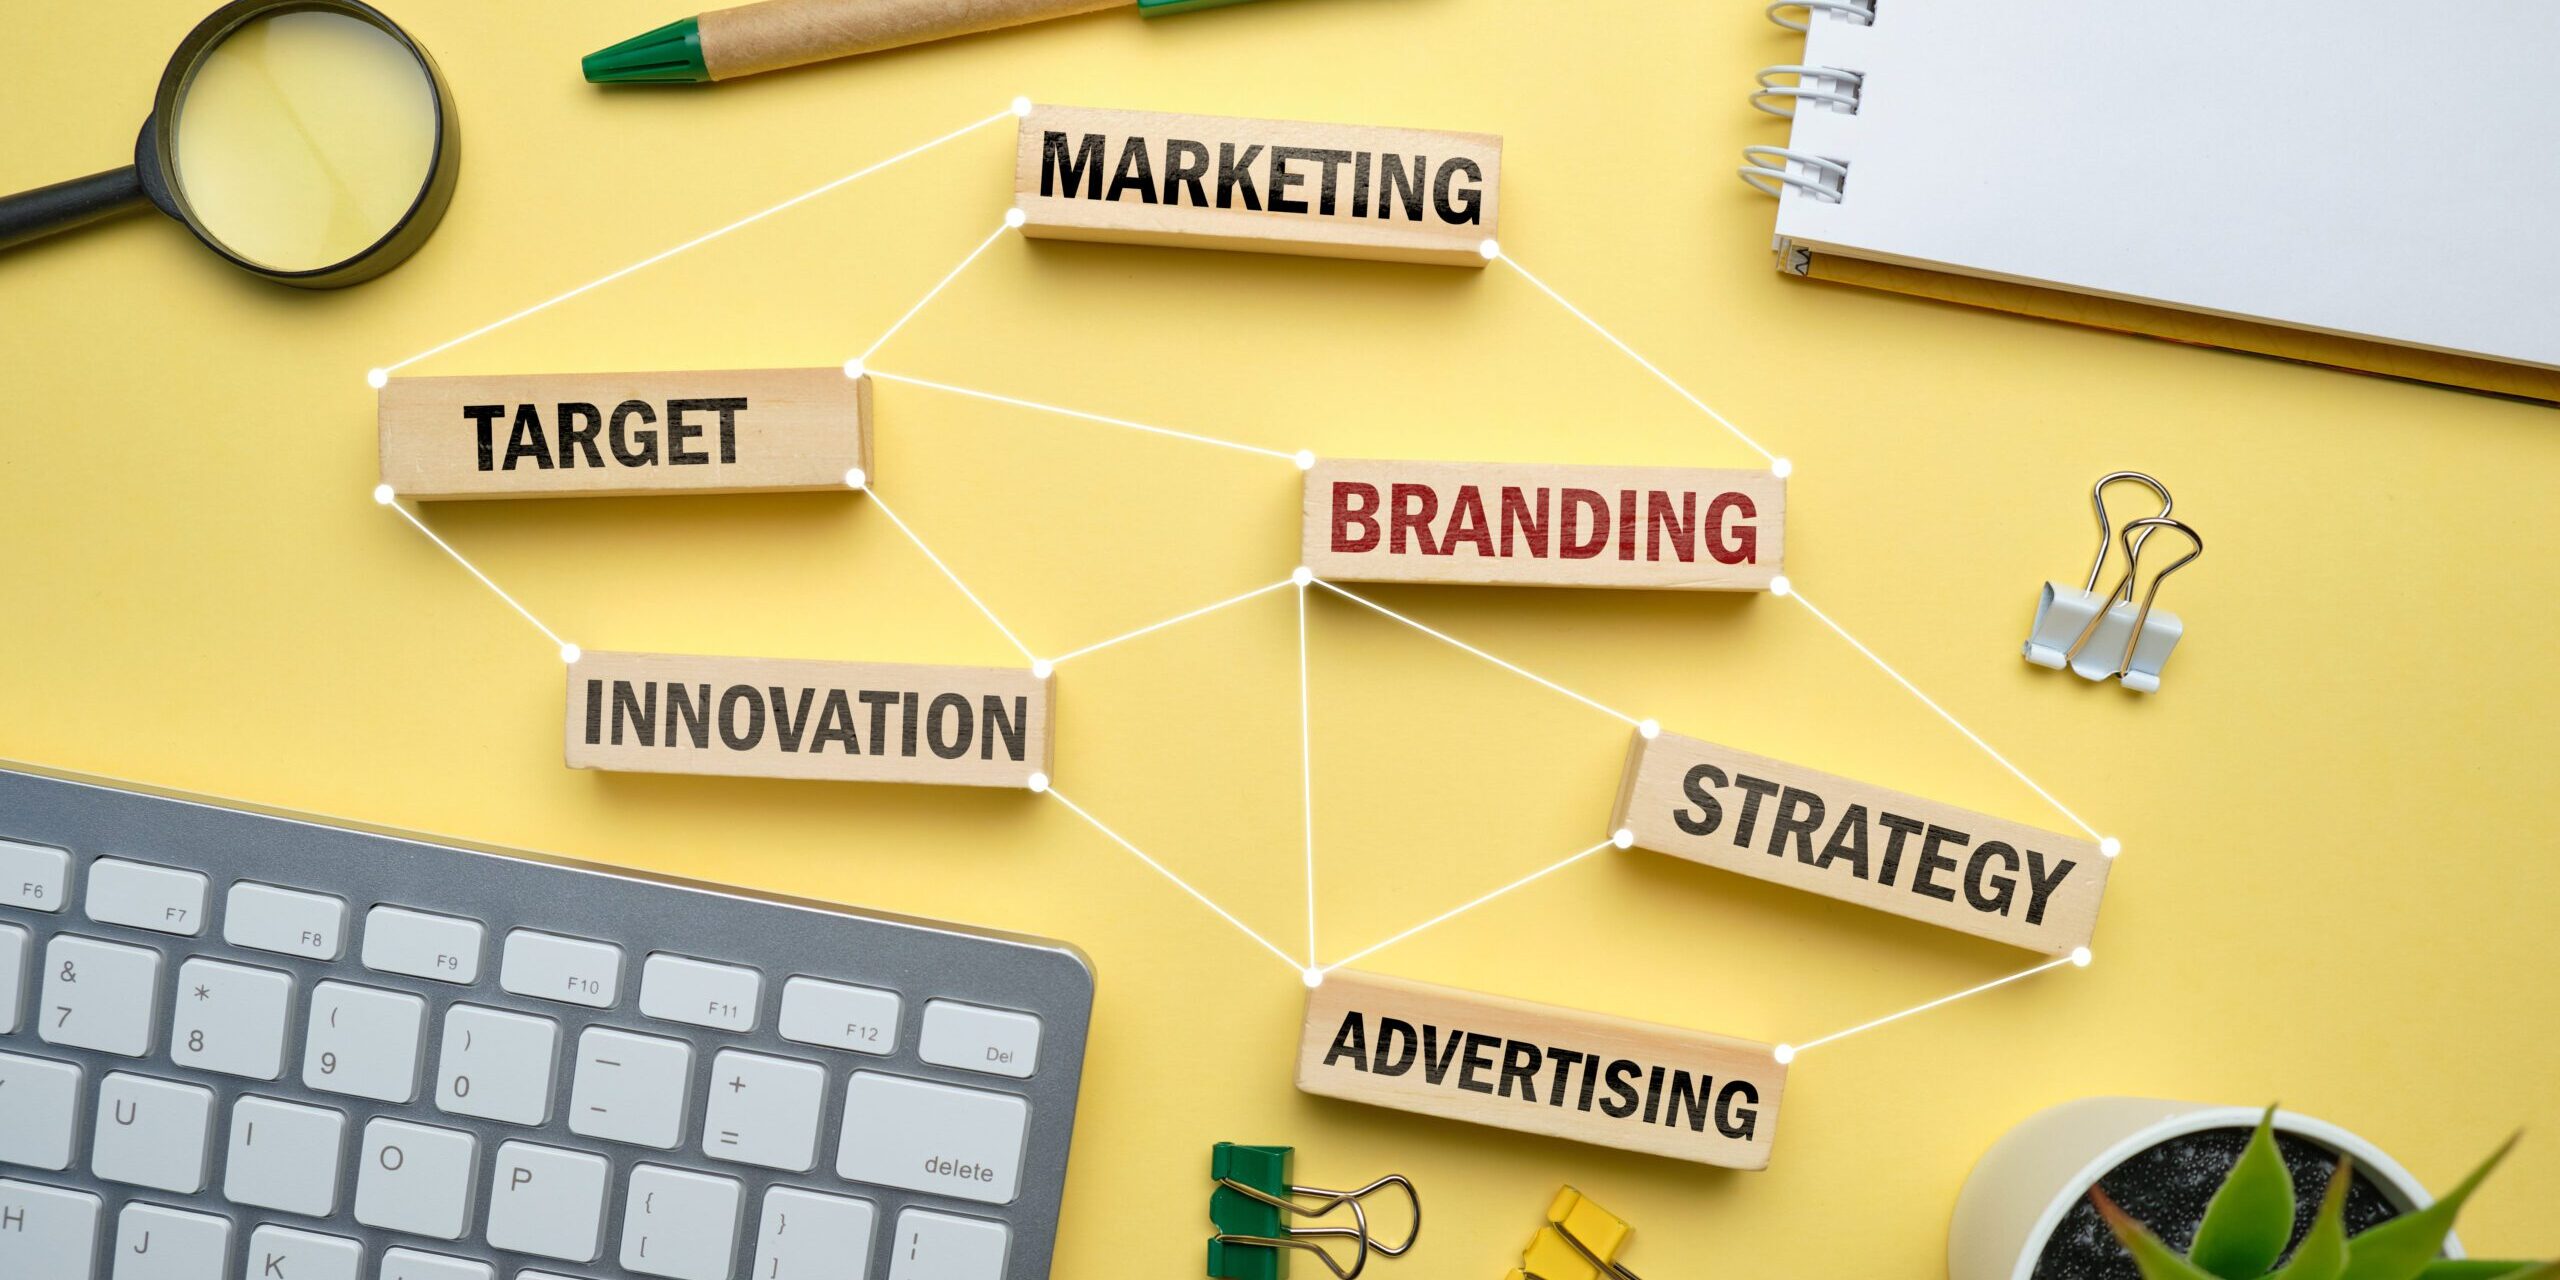 What is individual branding? Definition and examples